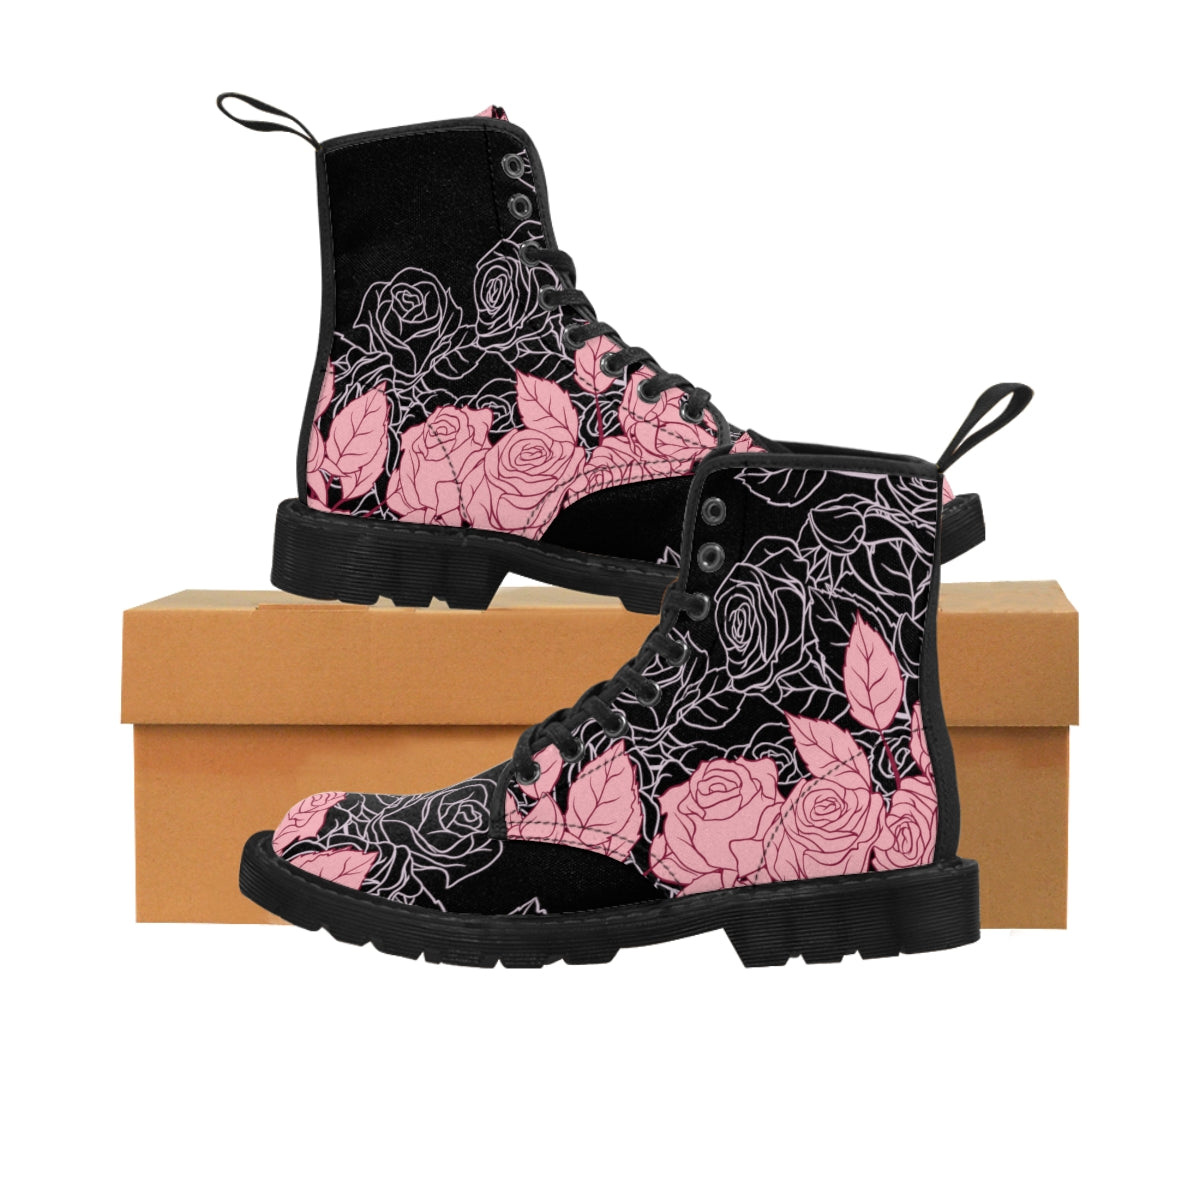 ARTZIRA PINK FLORAL WOMEN'S CANVAS BOOTS, LIVE ARTISTICALLY WITH THIS FEMININE FLORAL HIGH TOP RUBBER SOLE BOOTS BLACK